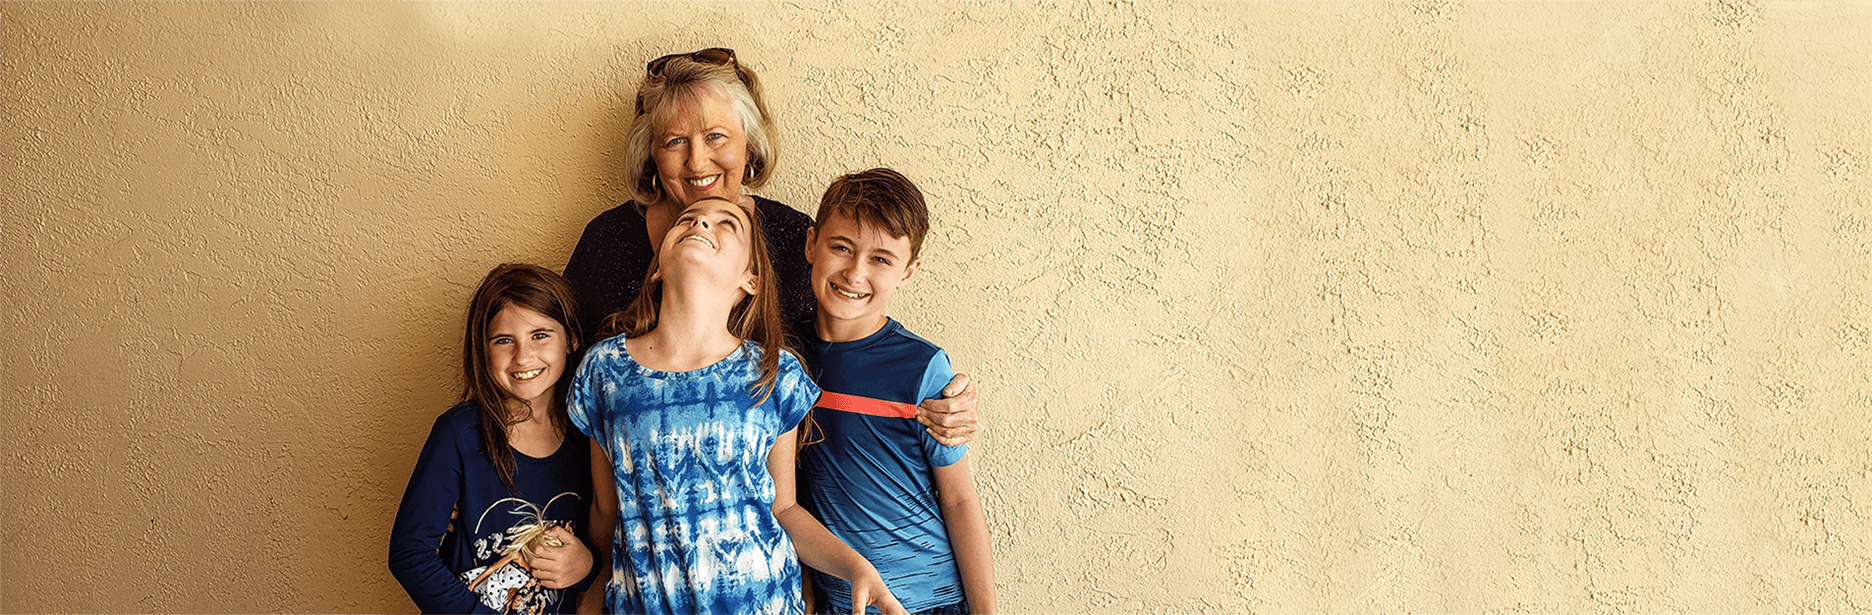 things to consider when moving close to grandchildren